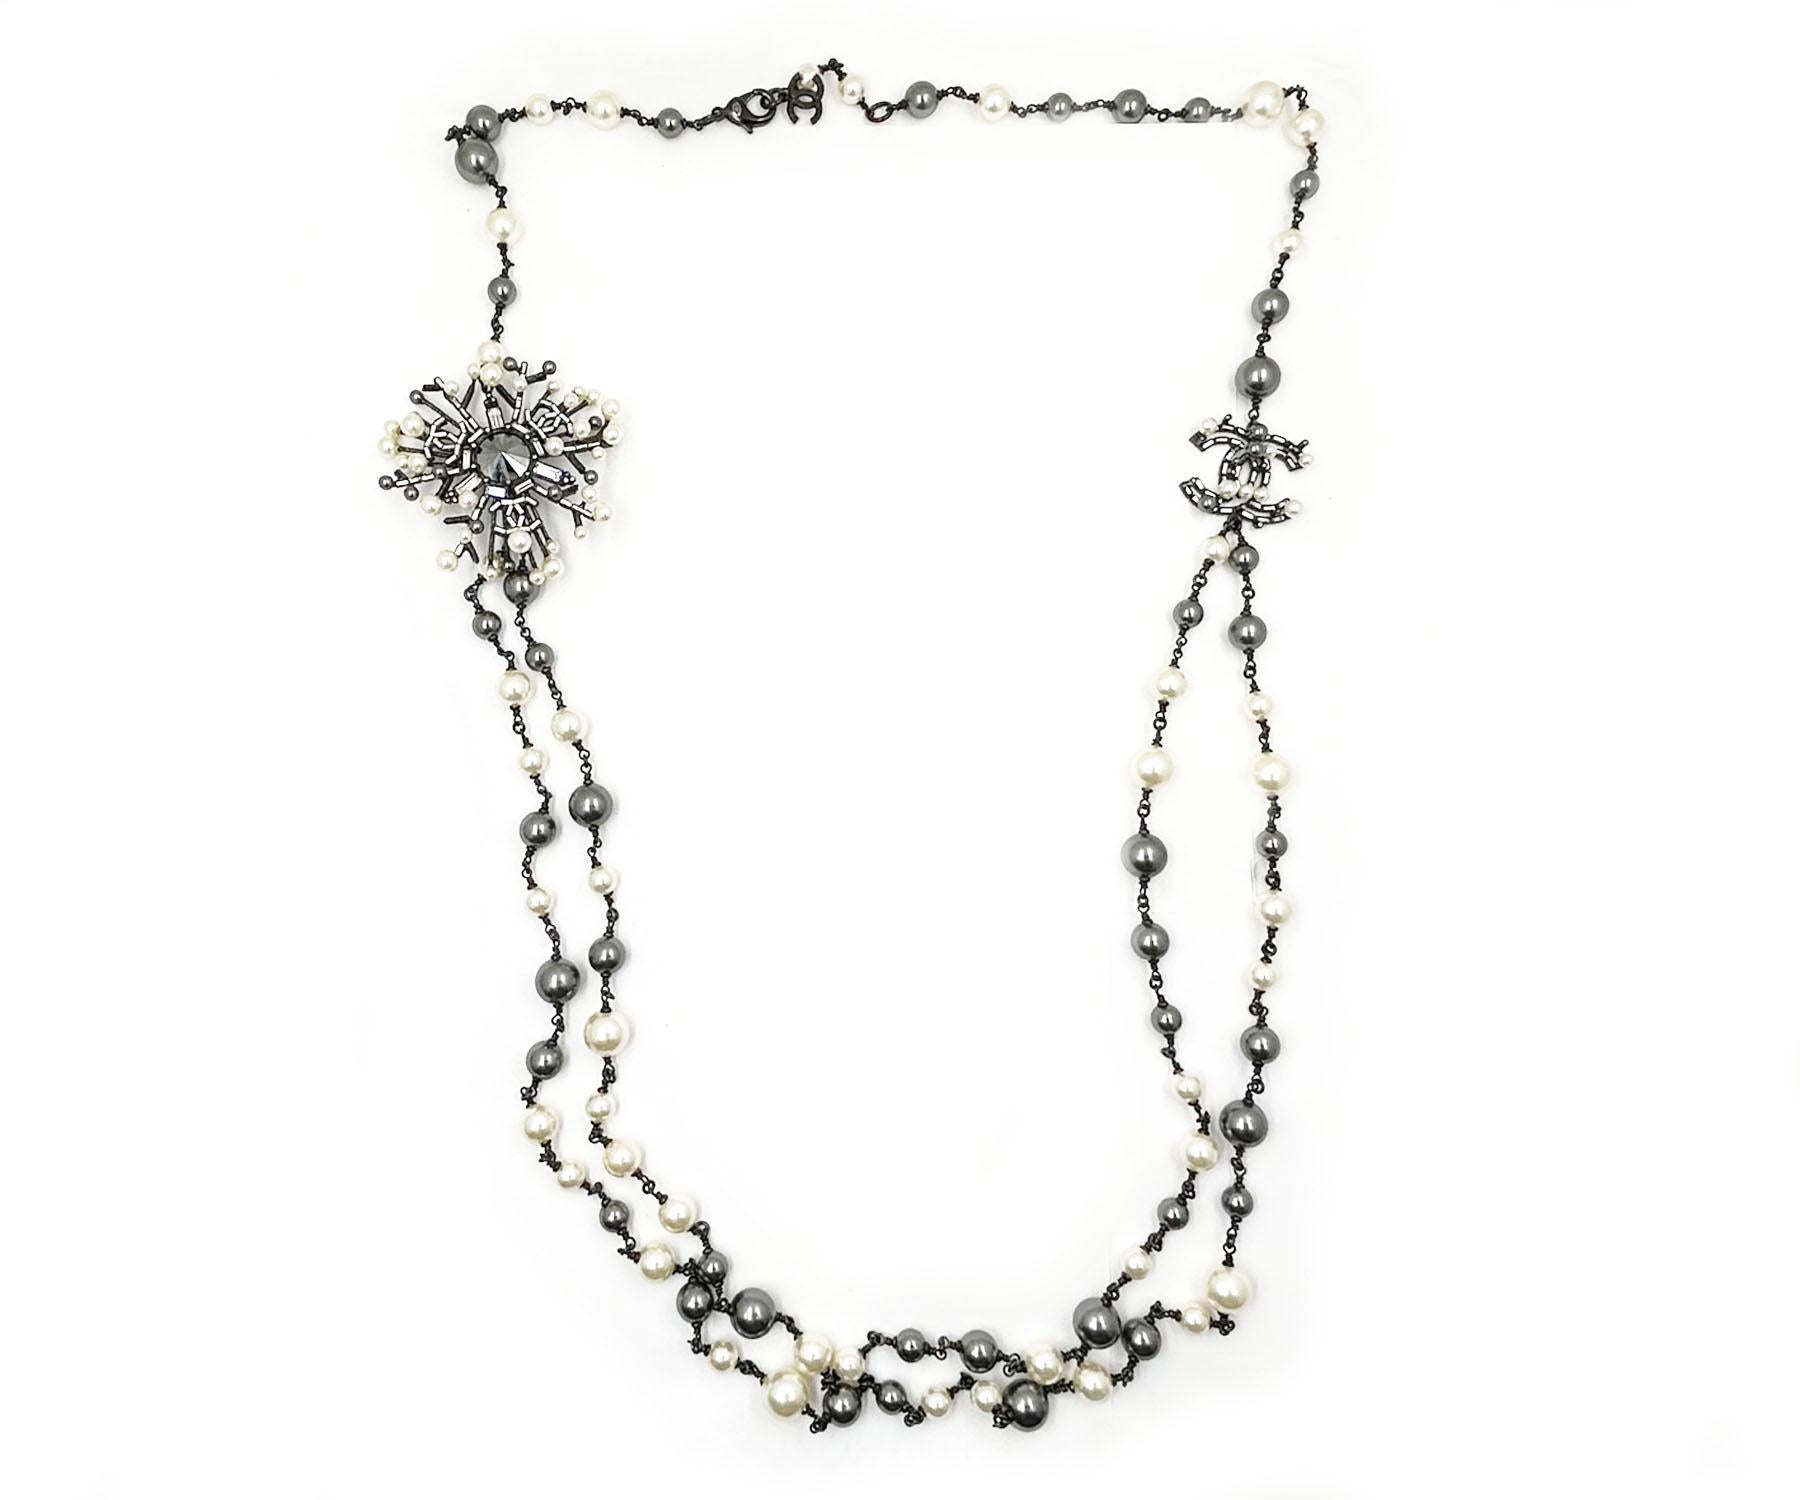 Chanel Gunmetal CC Snowflake Baguette Crystal 2 Strand Pearl Long Necklace

* Marked 10
* Made in Italy
* Comes with the original Chanel dustbag

-It is approximately 46